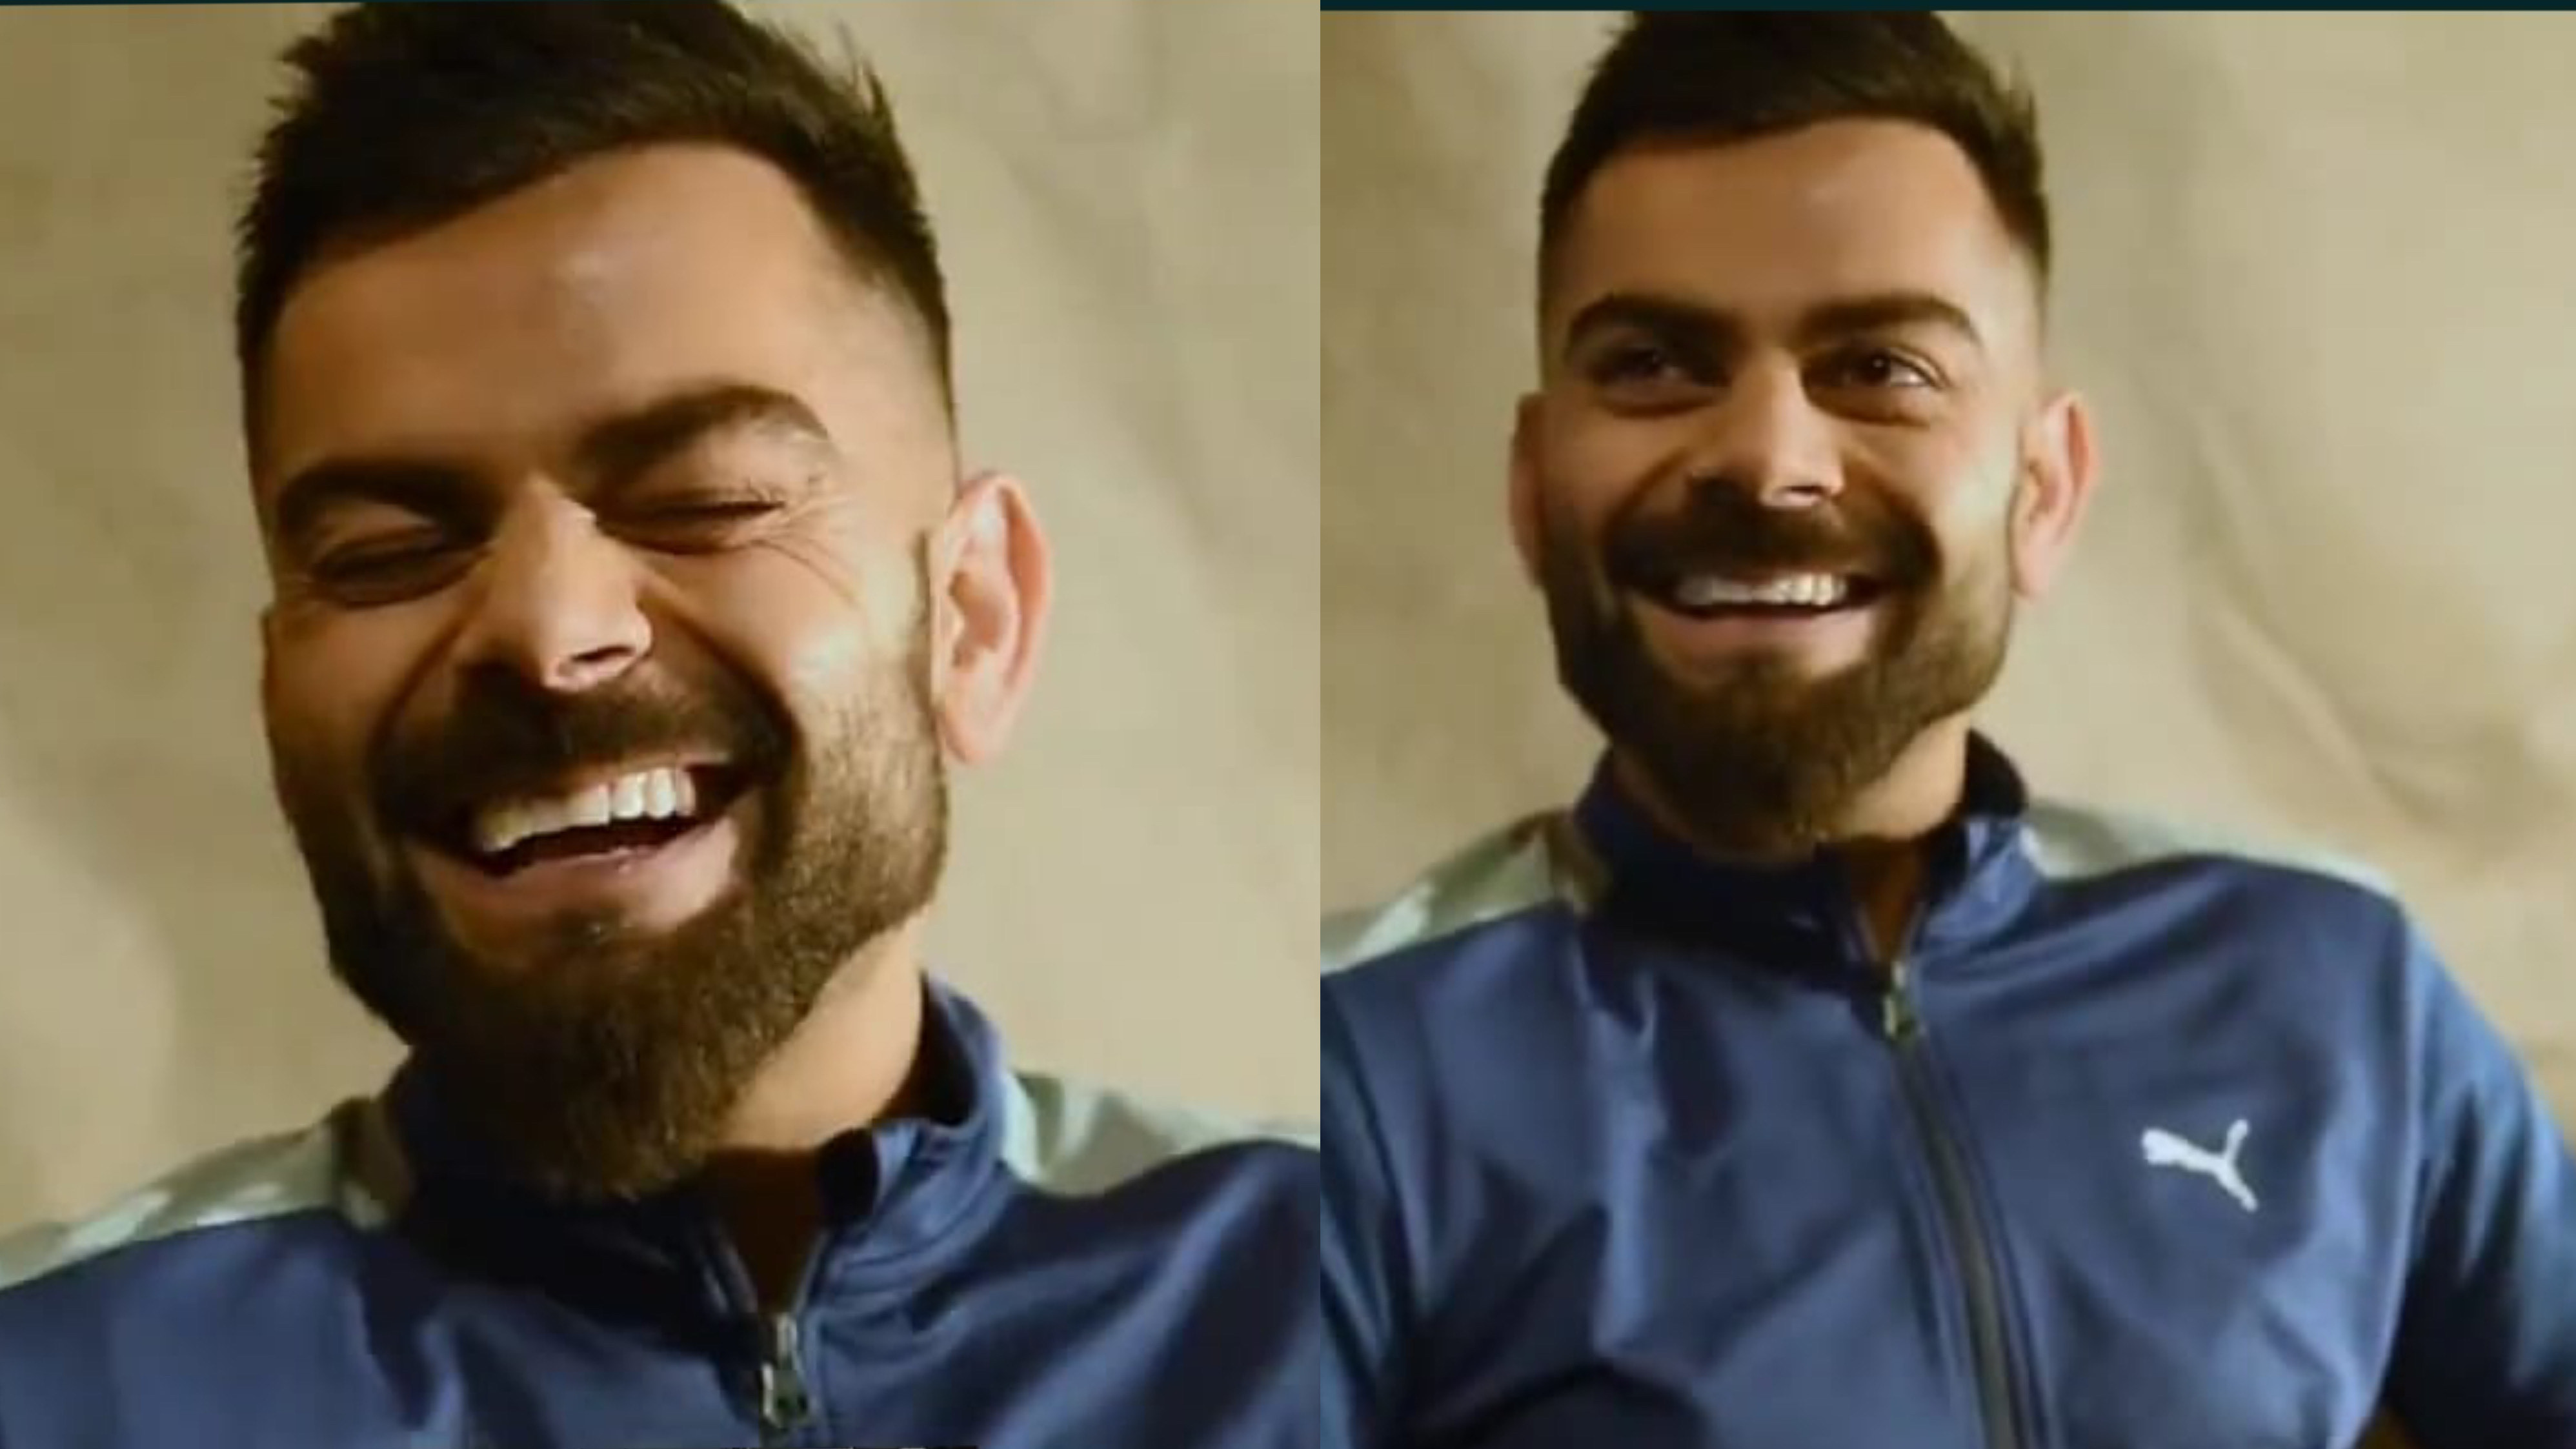 WATCH - Virat Kohli laughs while talking about street cricket slangs like 'Batta' and 'Baby Over'